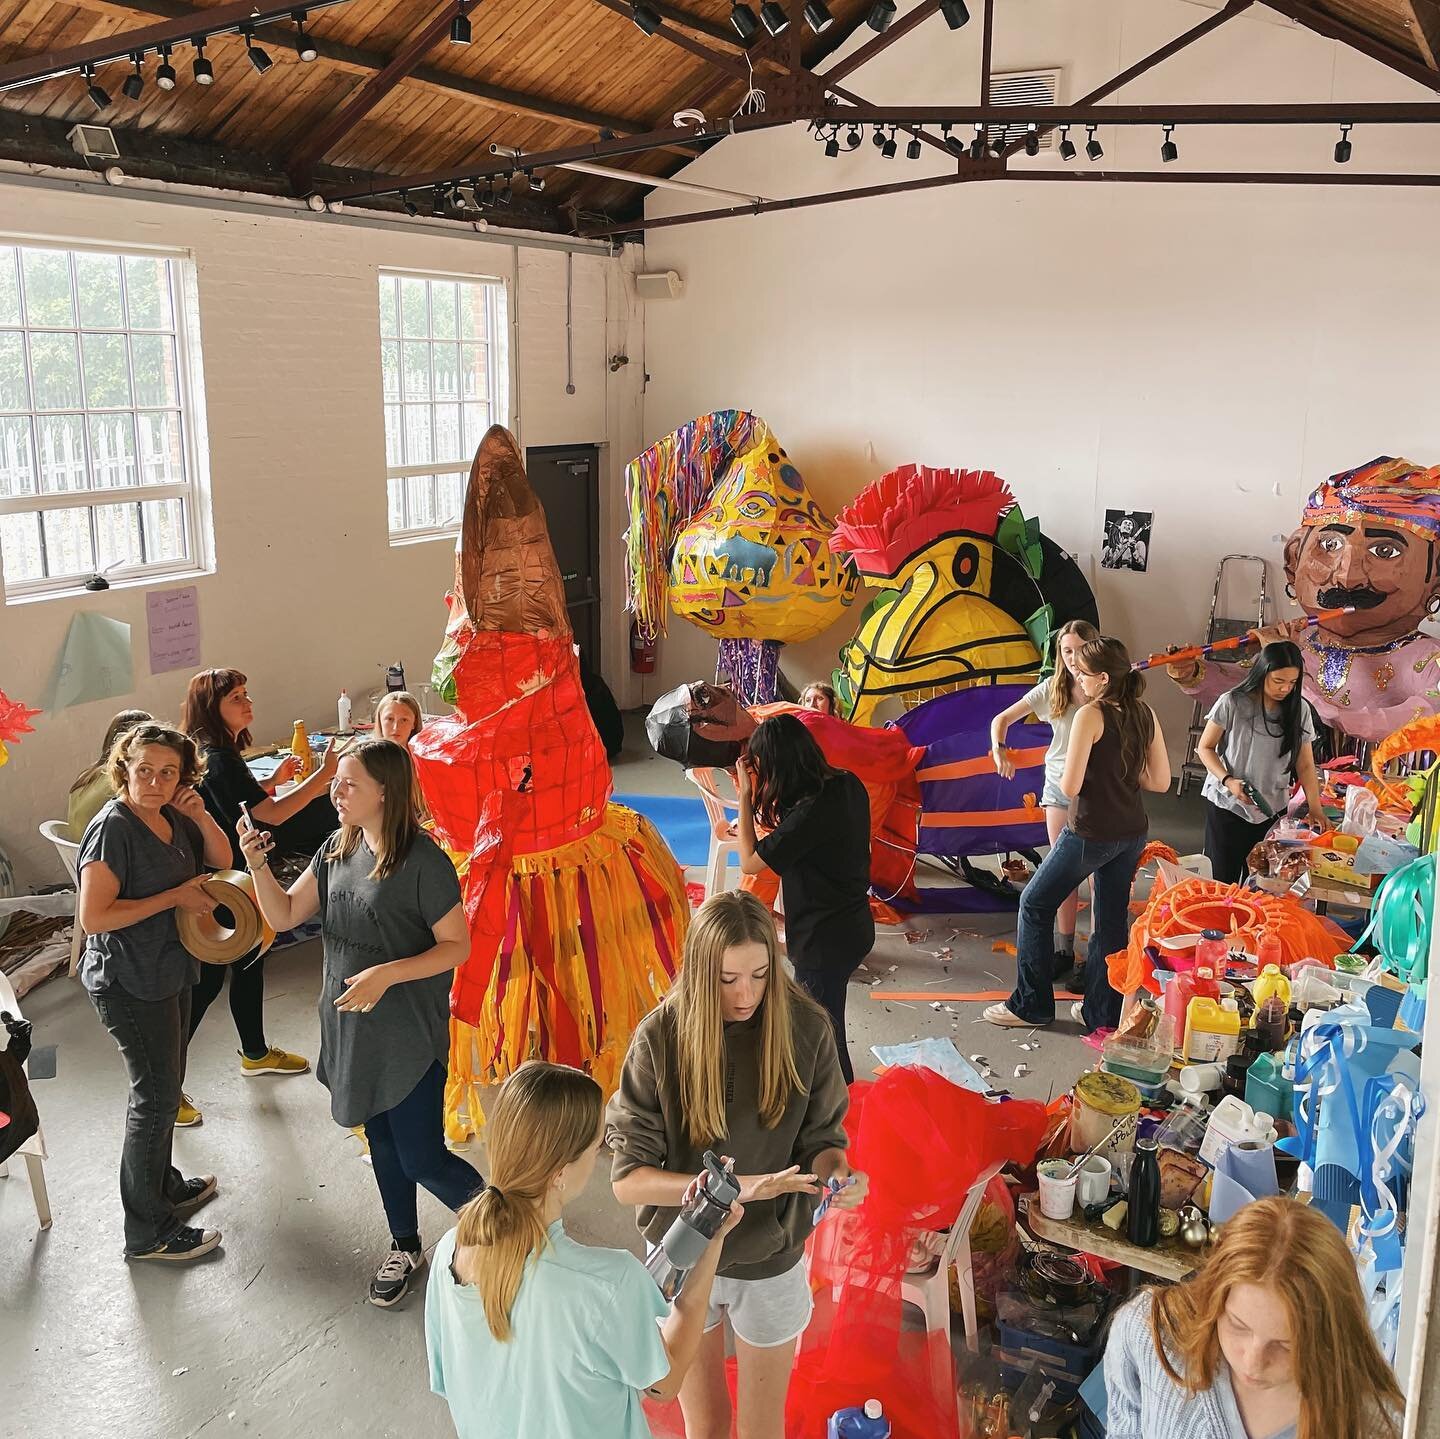 Workshop takeover for Charivari 2023 builds🌟

Last summer local schools spent days in our workshop designing and creating their very own carnival builds, with the help of artists and teachers 

Learning new skills and taking ideas through to fruitio